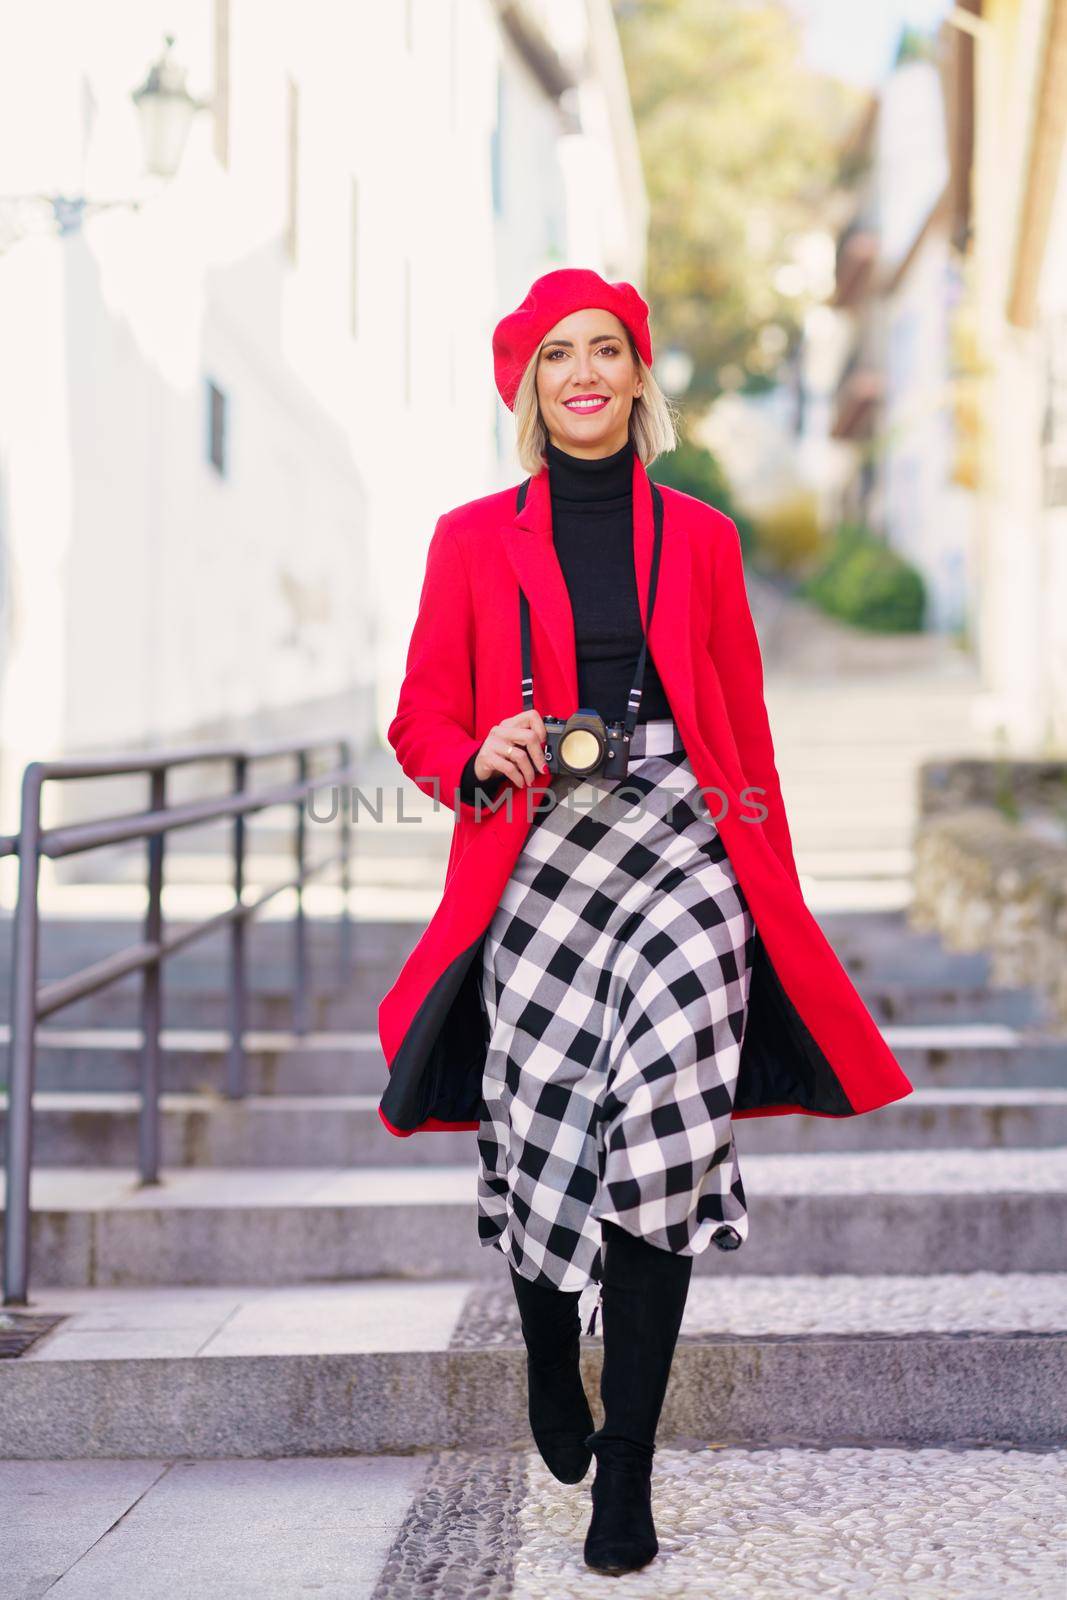 Full length of self assured young lady, with blond hair in elegant outfit and beret, smiling and looking at camera while walking on stone stones with photo camera